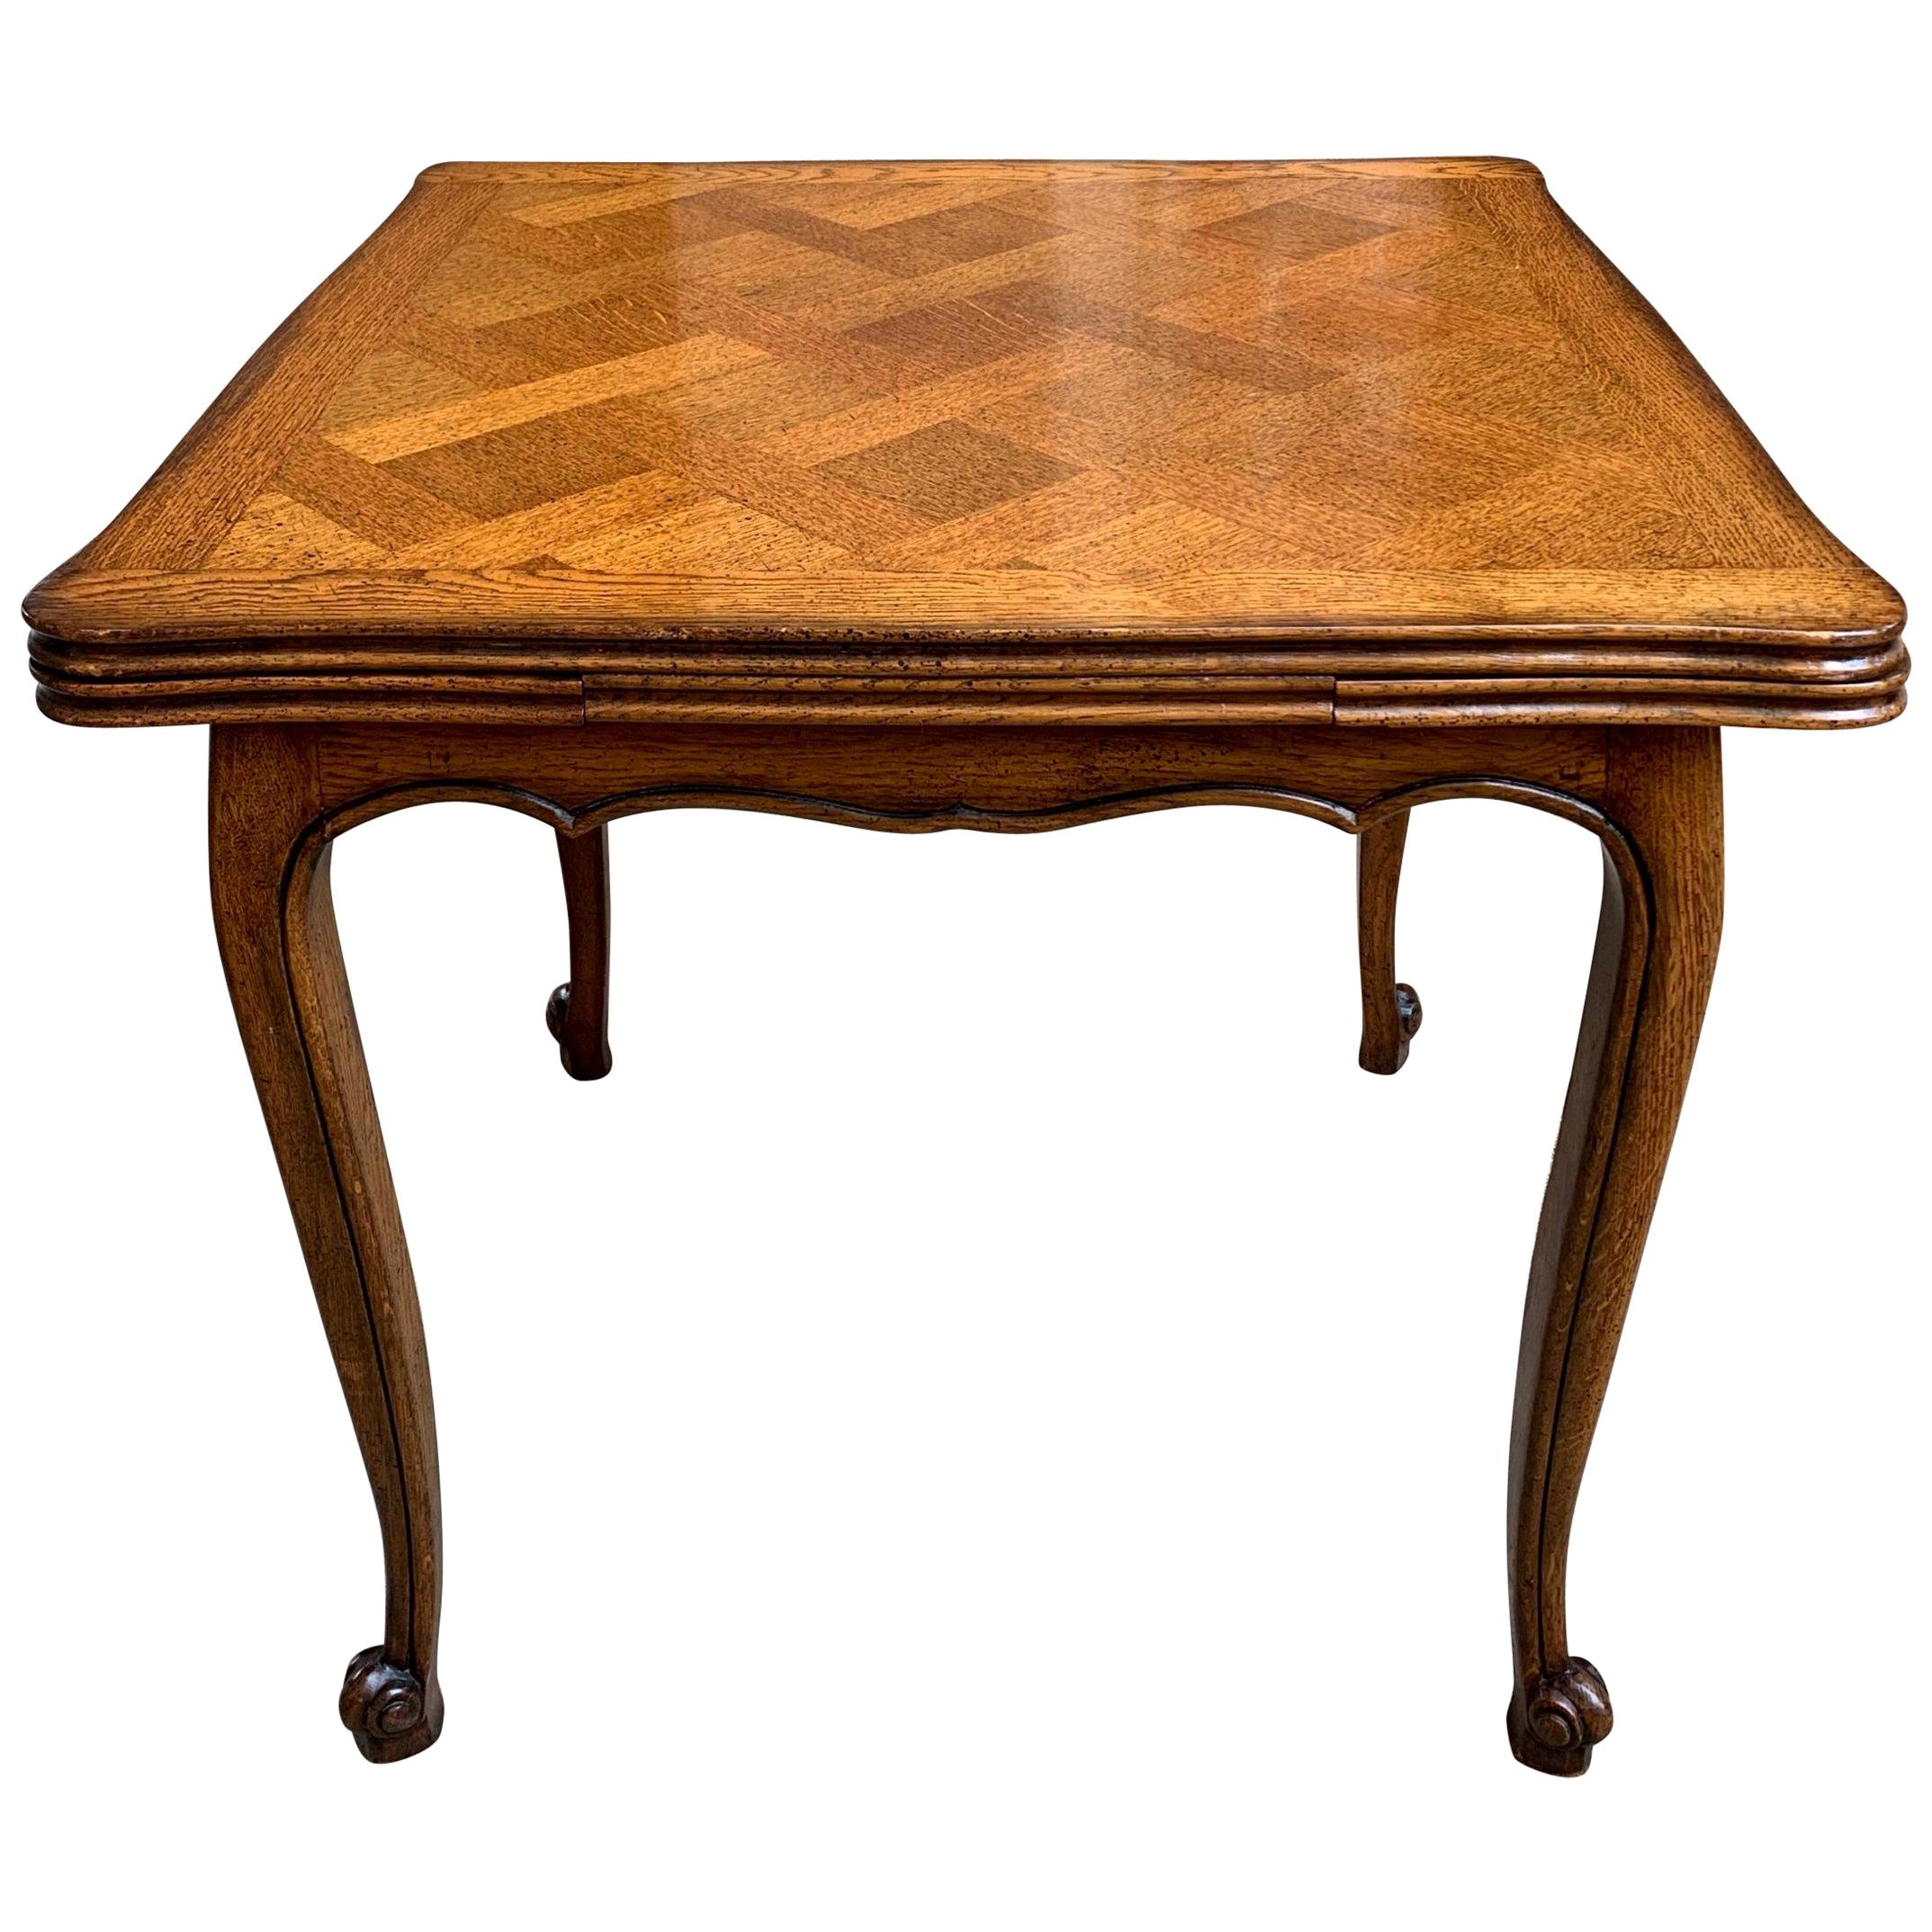 20th Century French Oak Draw-Leaf Dining Table Square Petite Louis XV Style